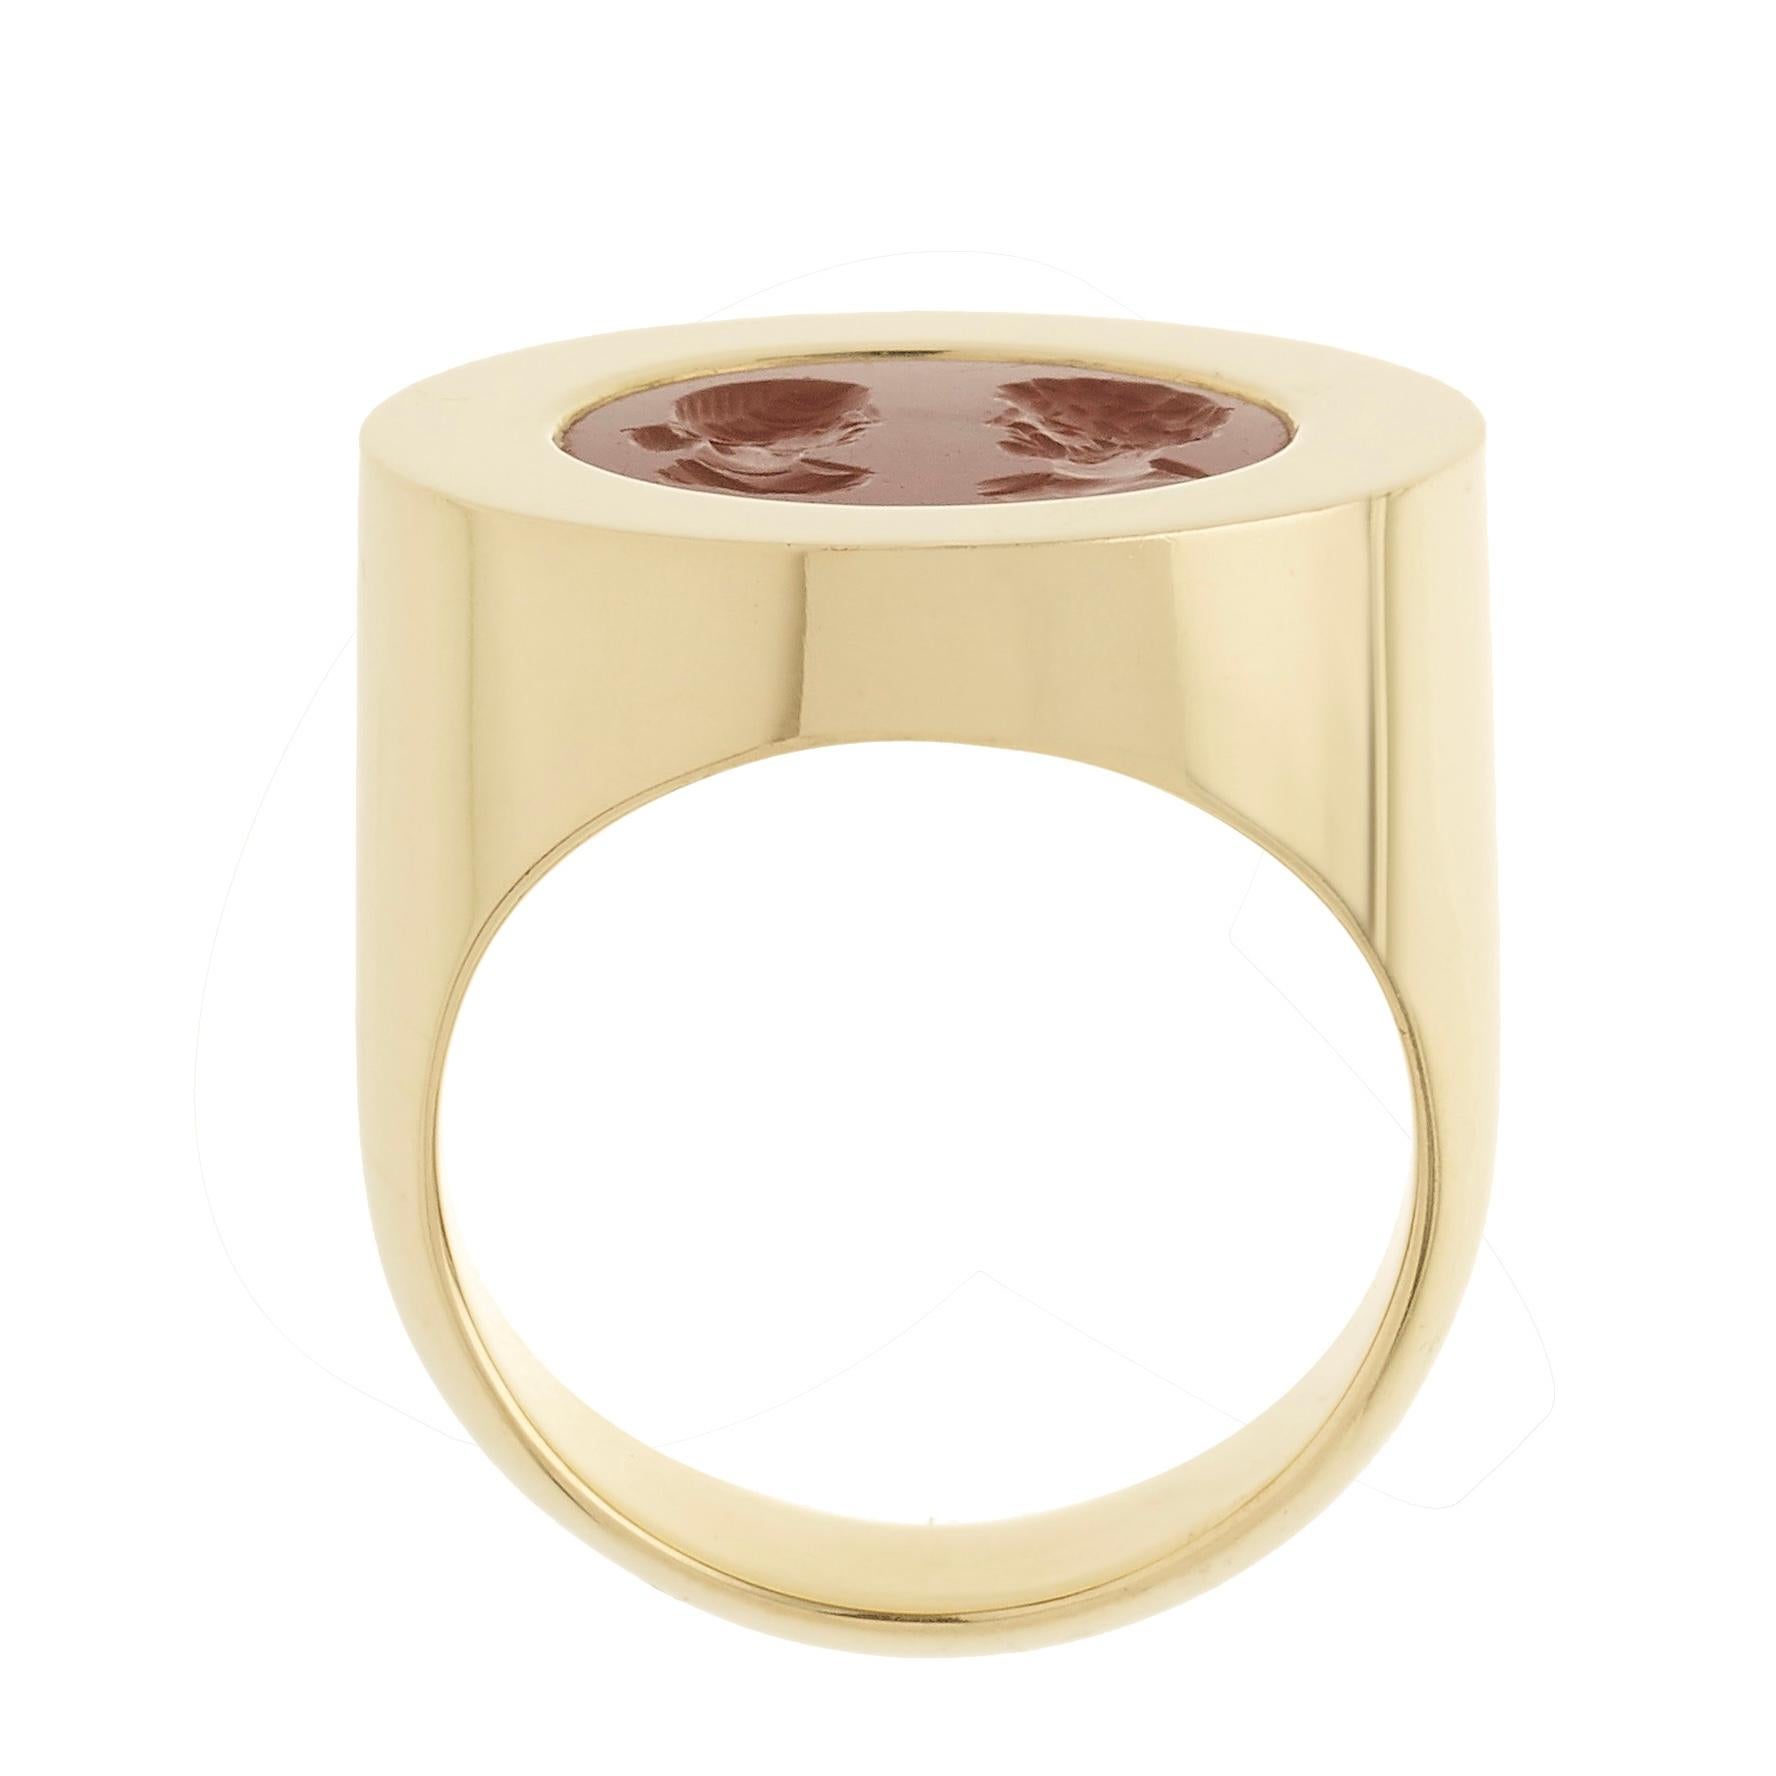 Victoria Strigini (b. 1991) 

A deep-set, thick-bezel, handcrafted contemporary wedding or engagement ring by Victoria Strigini, in 18k yellow gold with a high-shine finish, featuring a Roman intaglio from the 2nd - 3rd century AD, in jasper. The